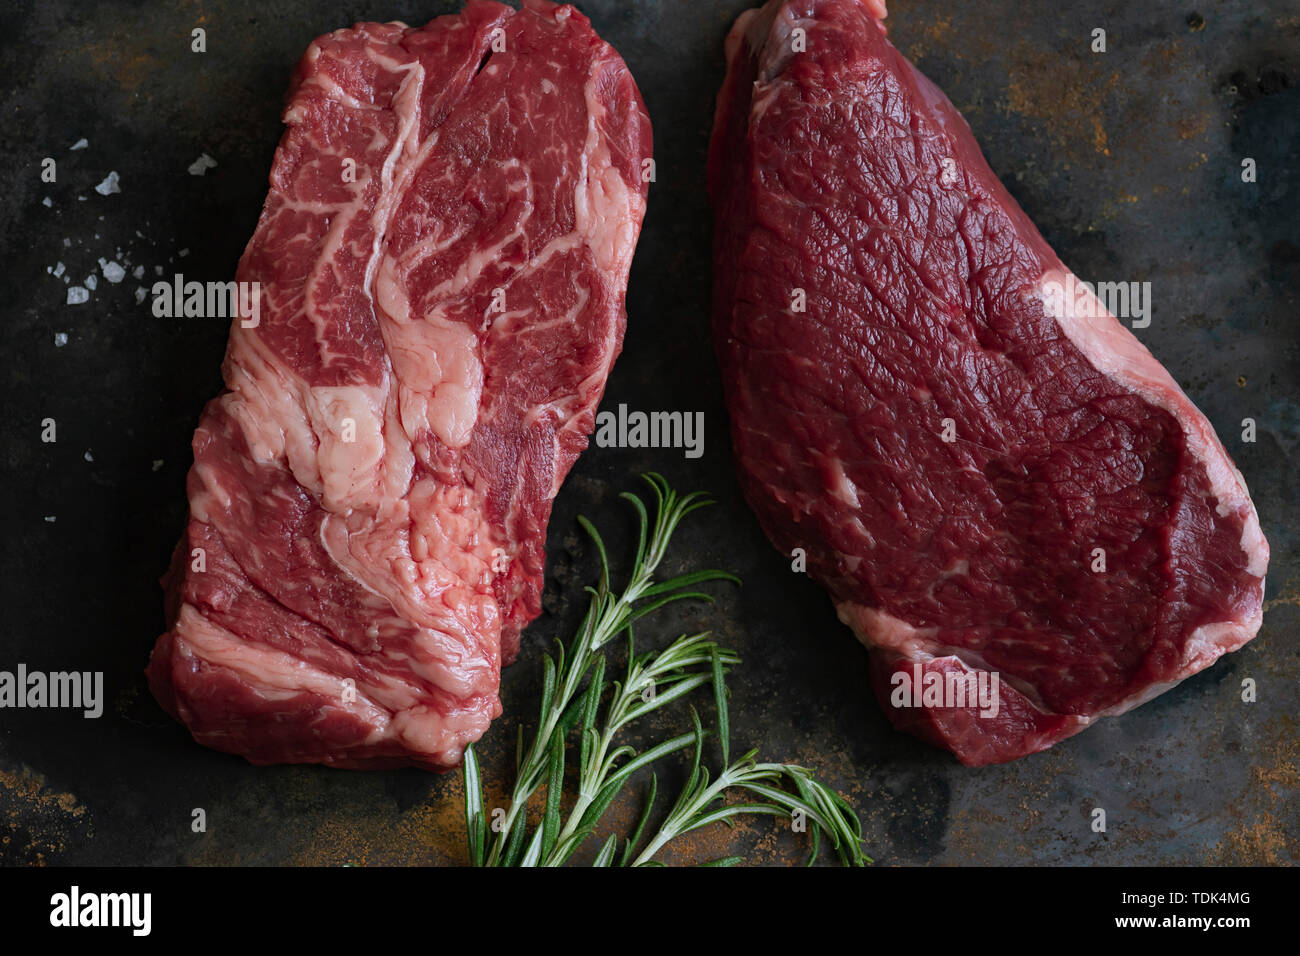 Raw black angus prime beef steak variety with rosemary, sea salt and spices Stock Photo